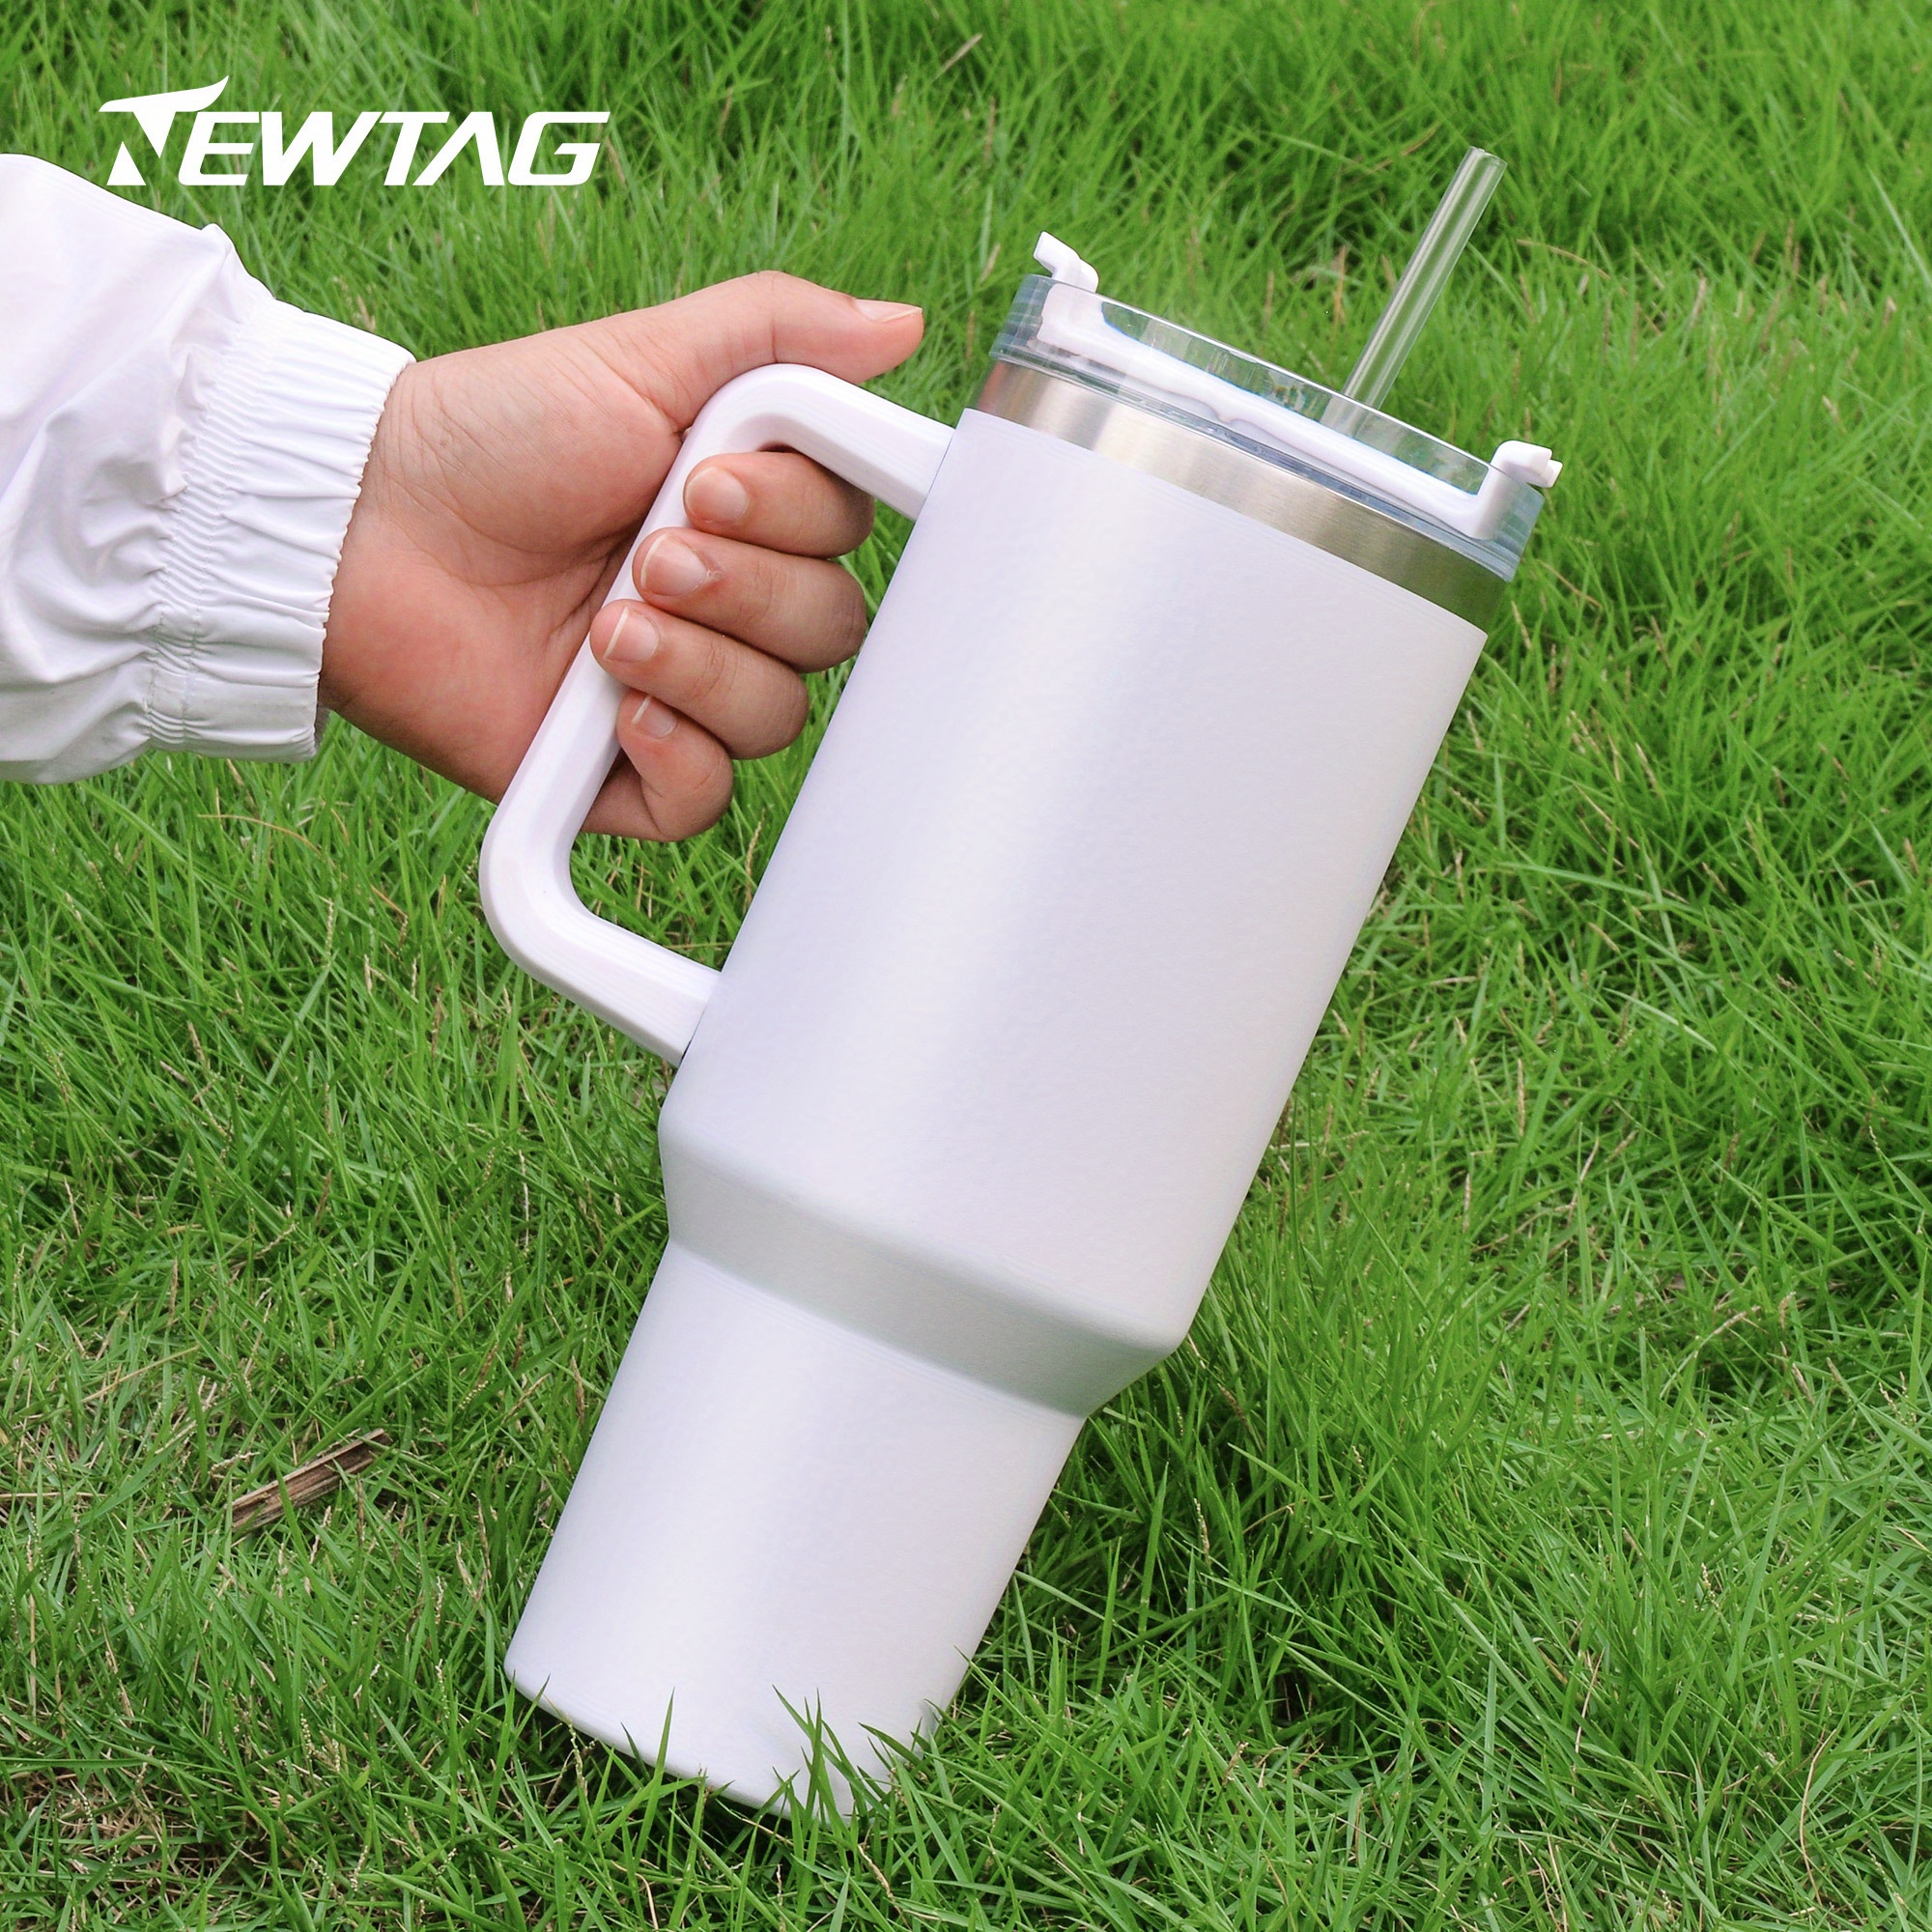 Stainless Steel Water Bottle  Stanleys Cup with Straw and Handle